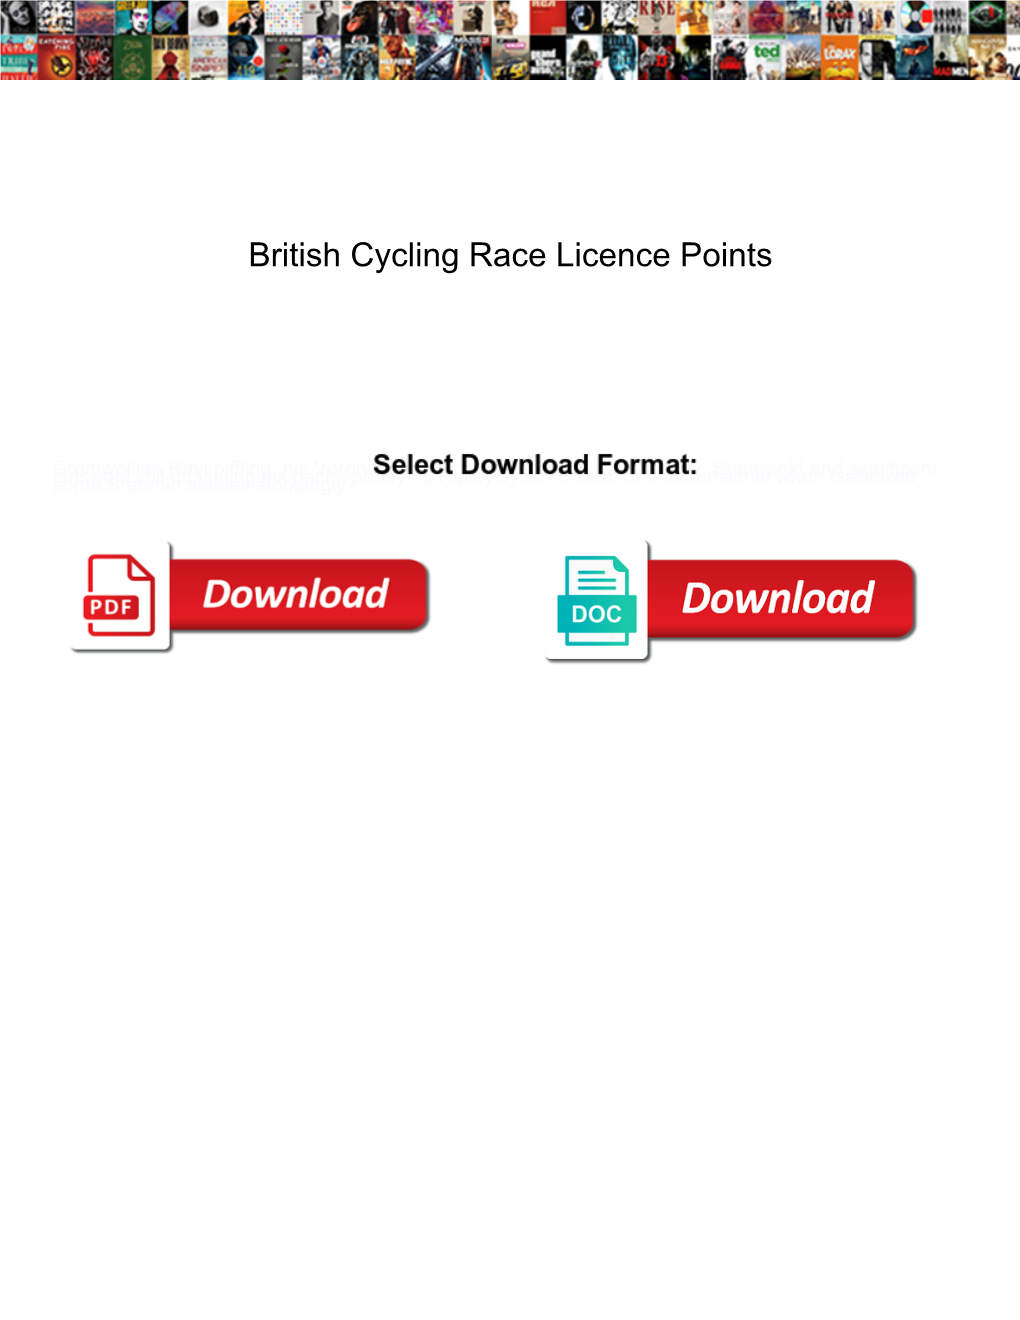 British Cycling Race Licence Points